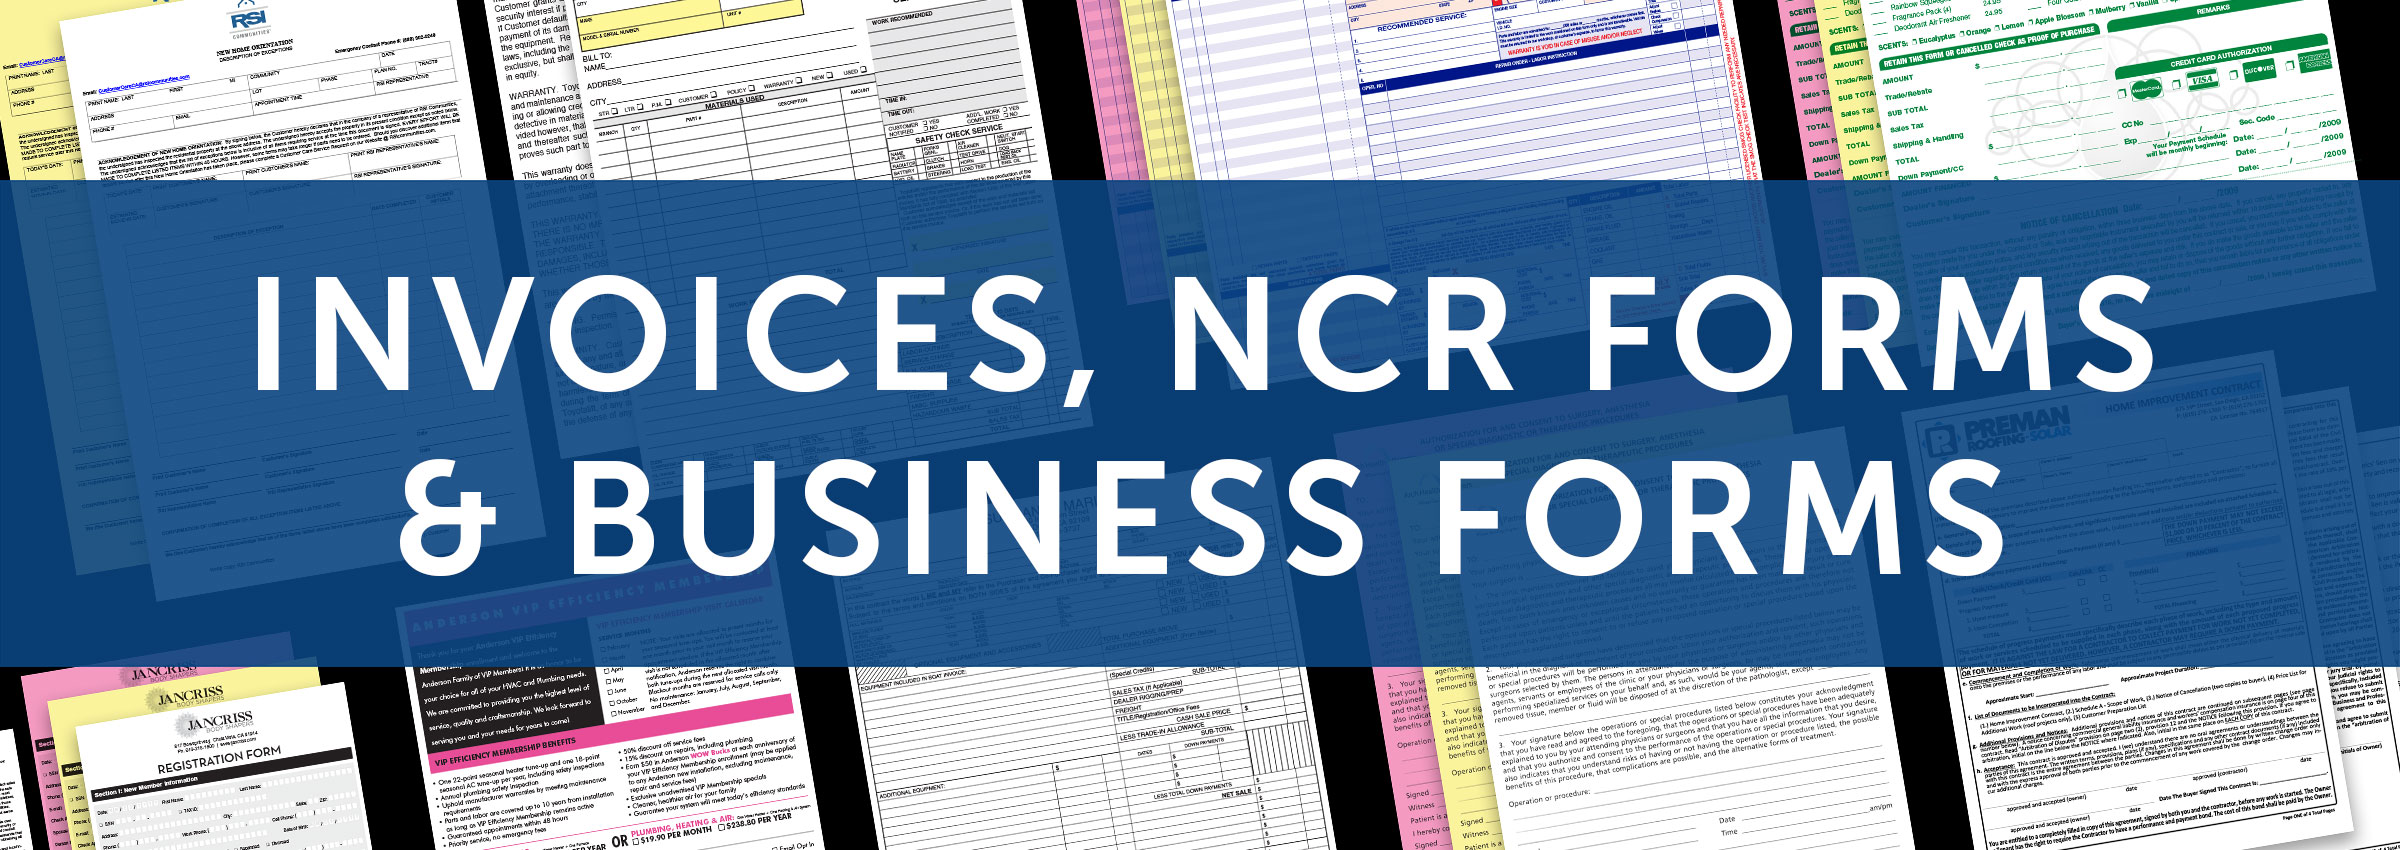 NCR Business Forms